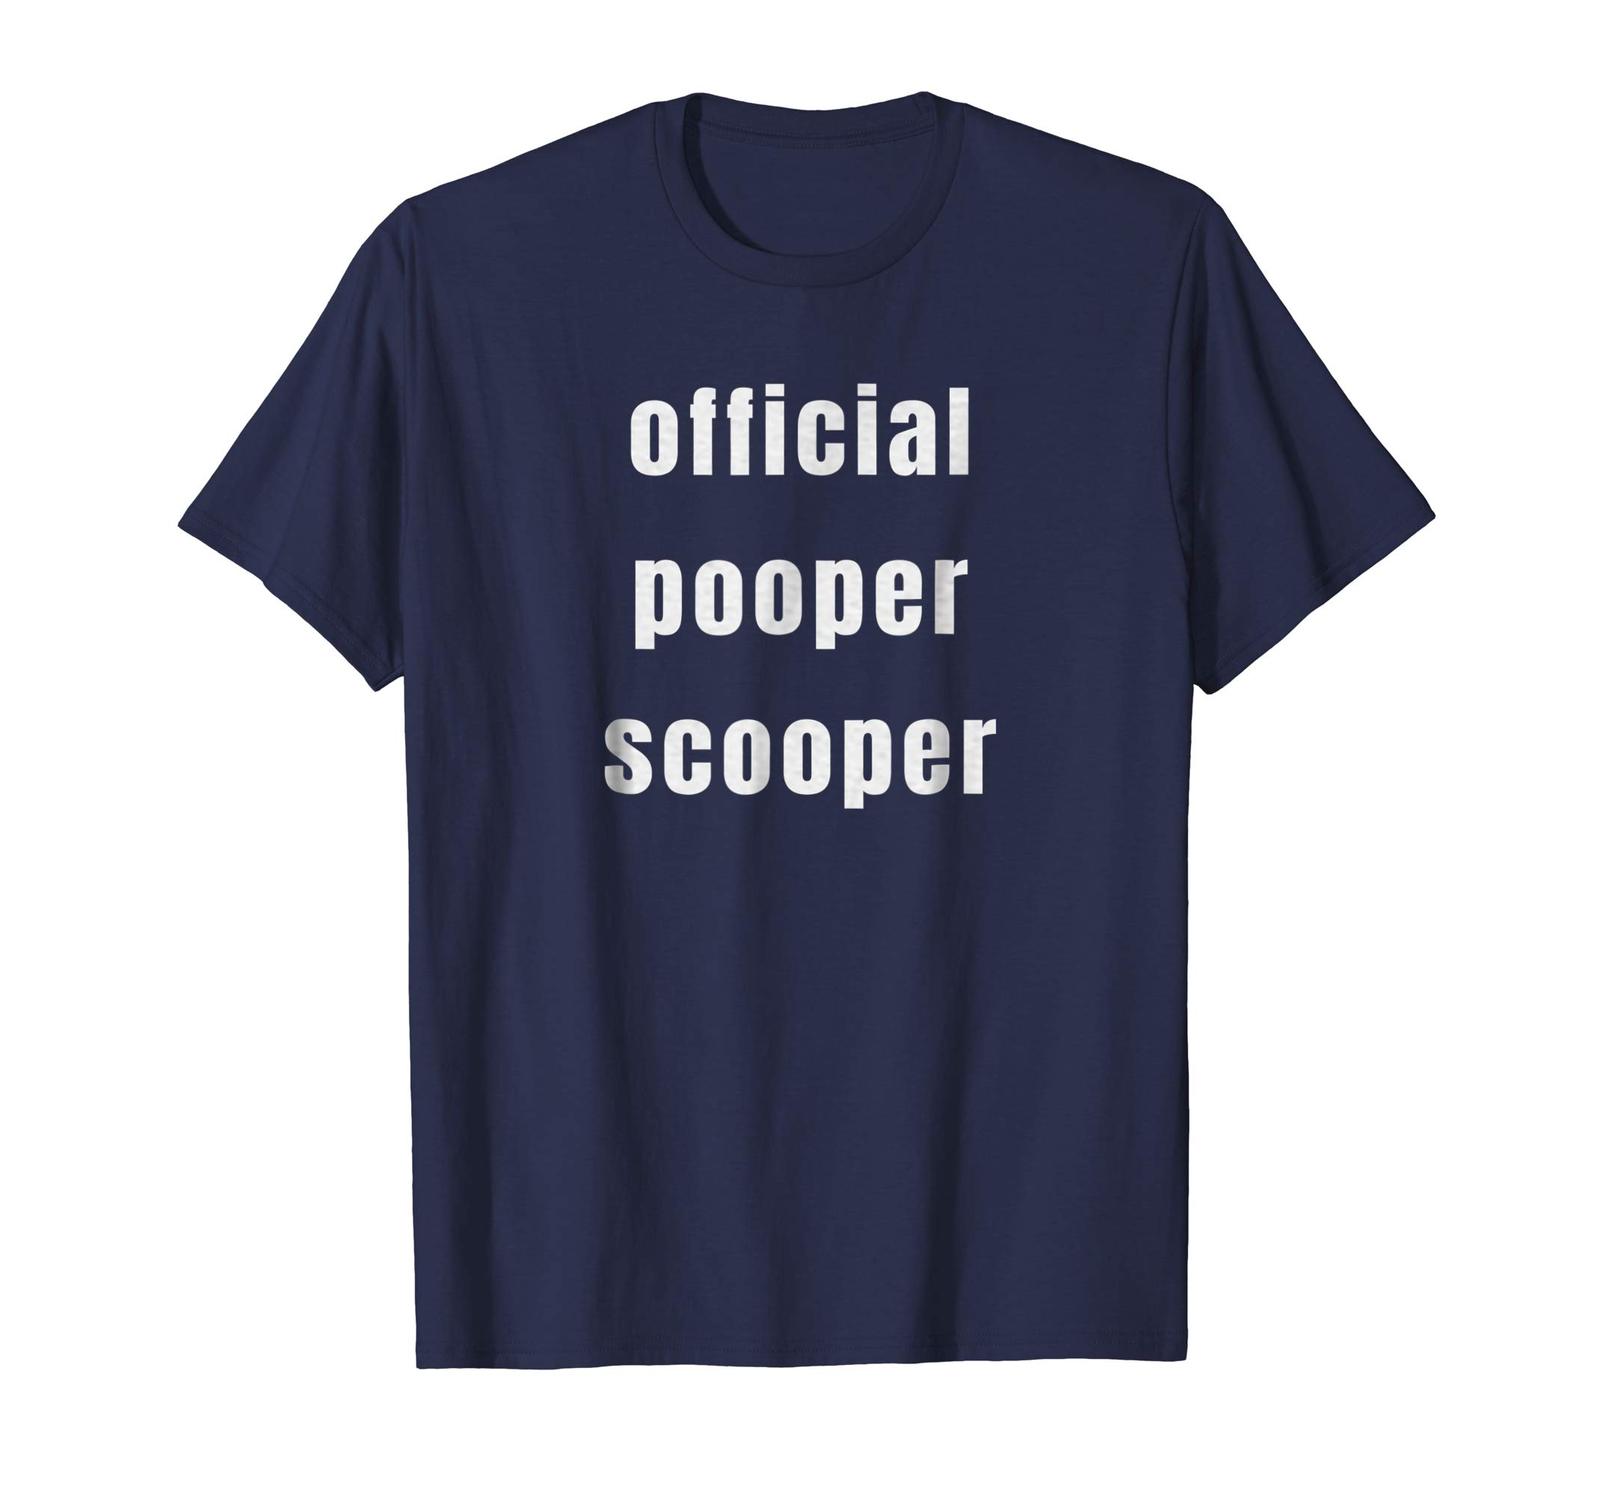 Dog Fashion - Official Dog Pooper Scooper Funny Tshirt Doggy Themed Shirts Men